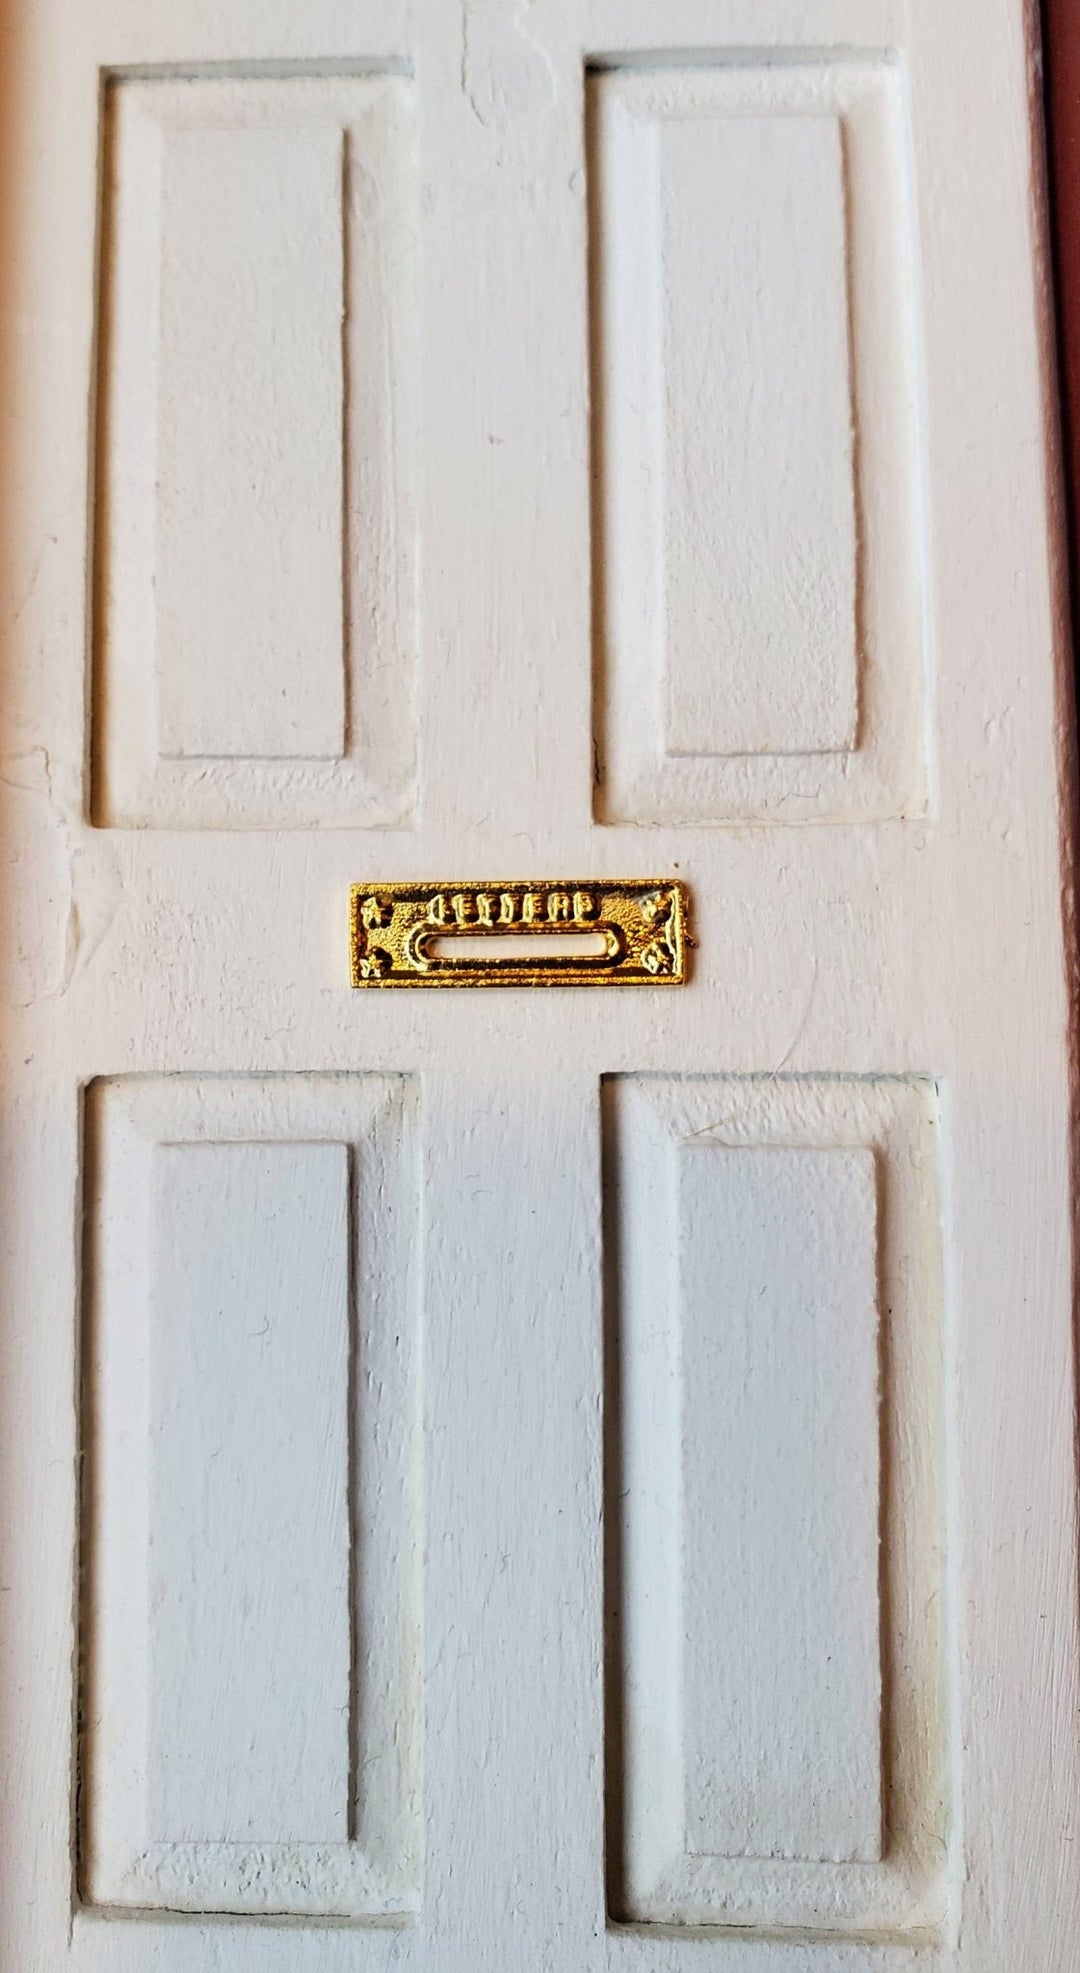 Dollhouse Miniature Letter Mail Slot for Exterior Door 1:12 Scale Gold Brass Metal - Miniature Crush